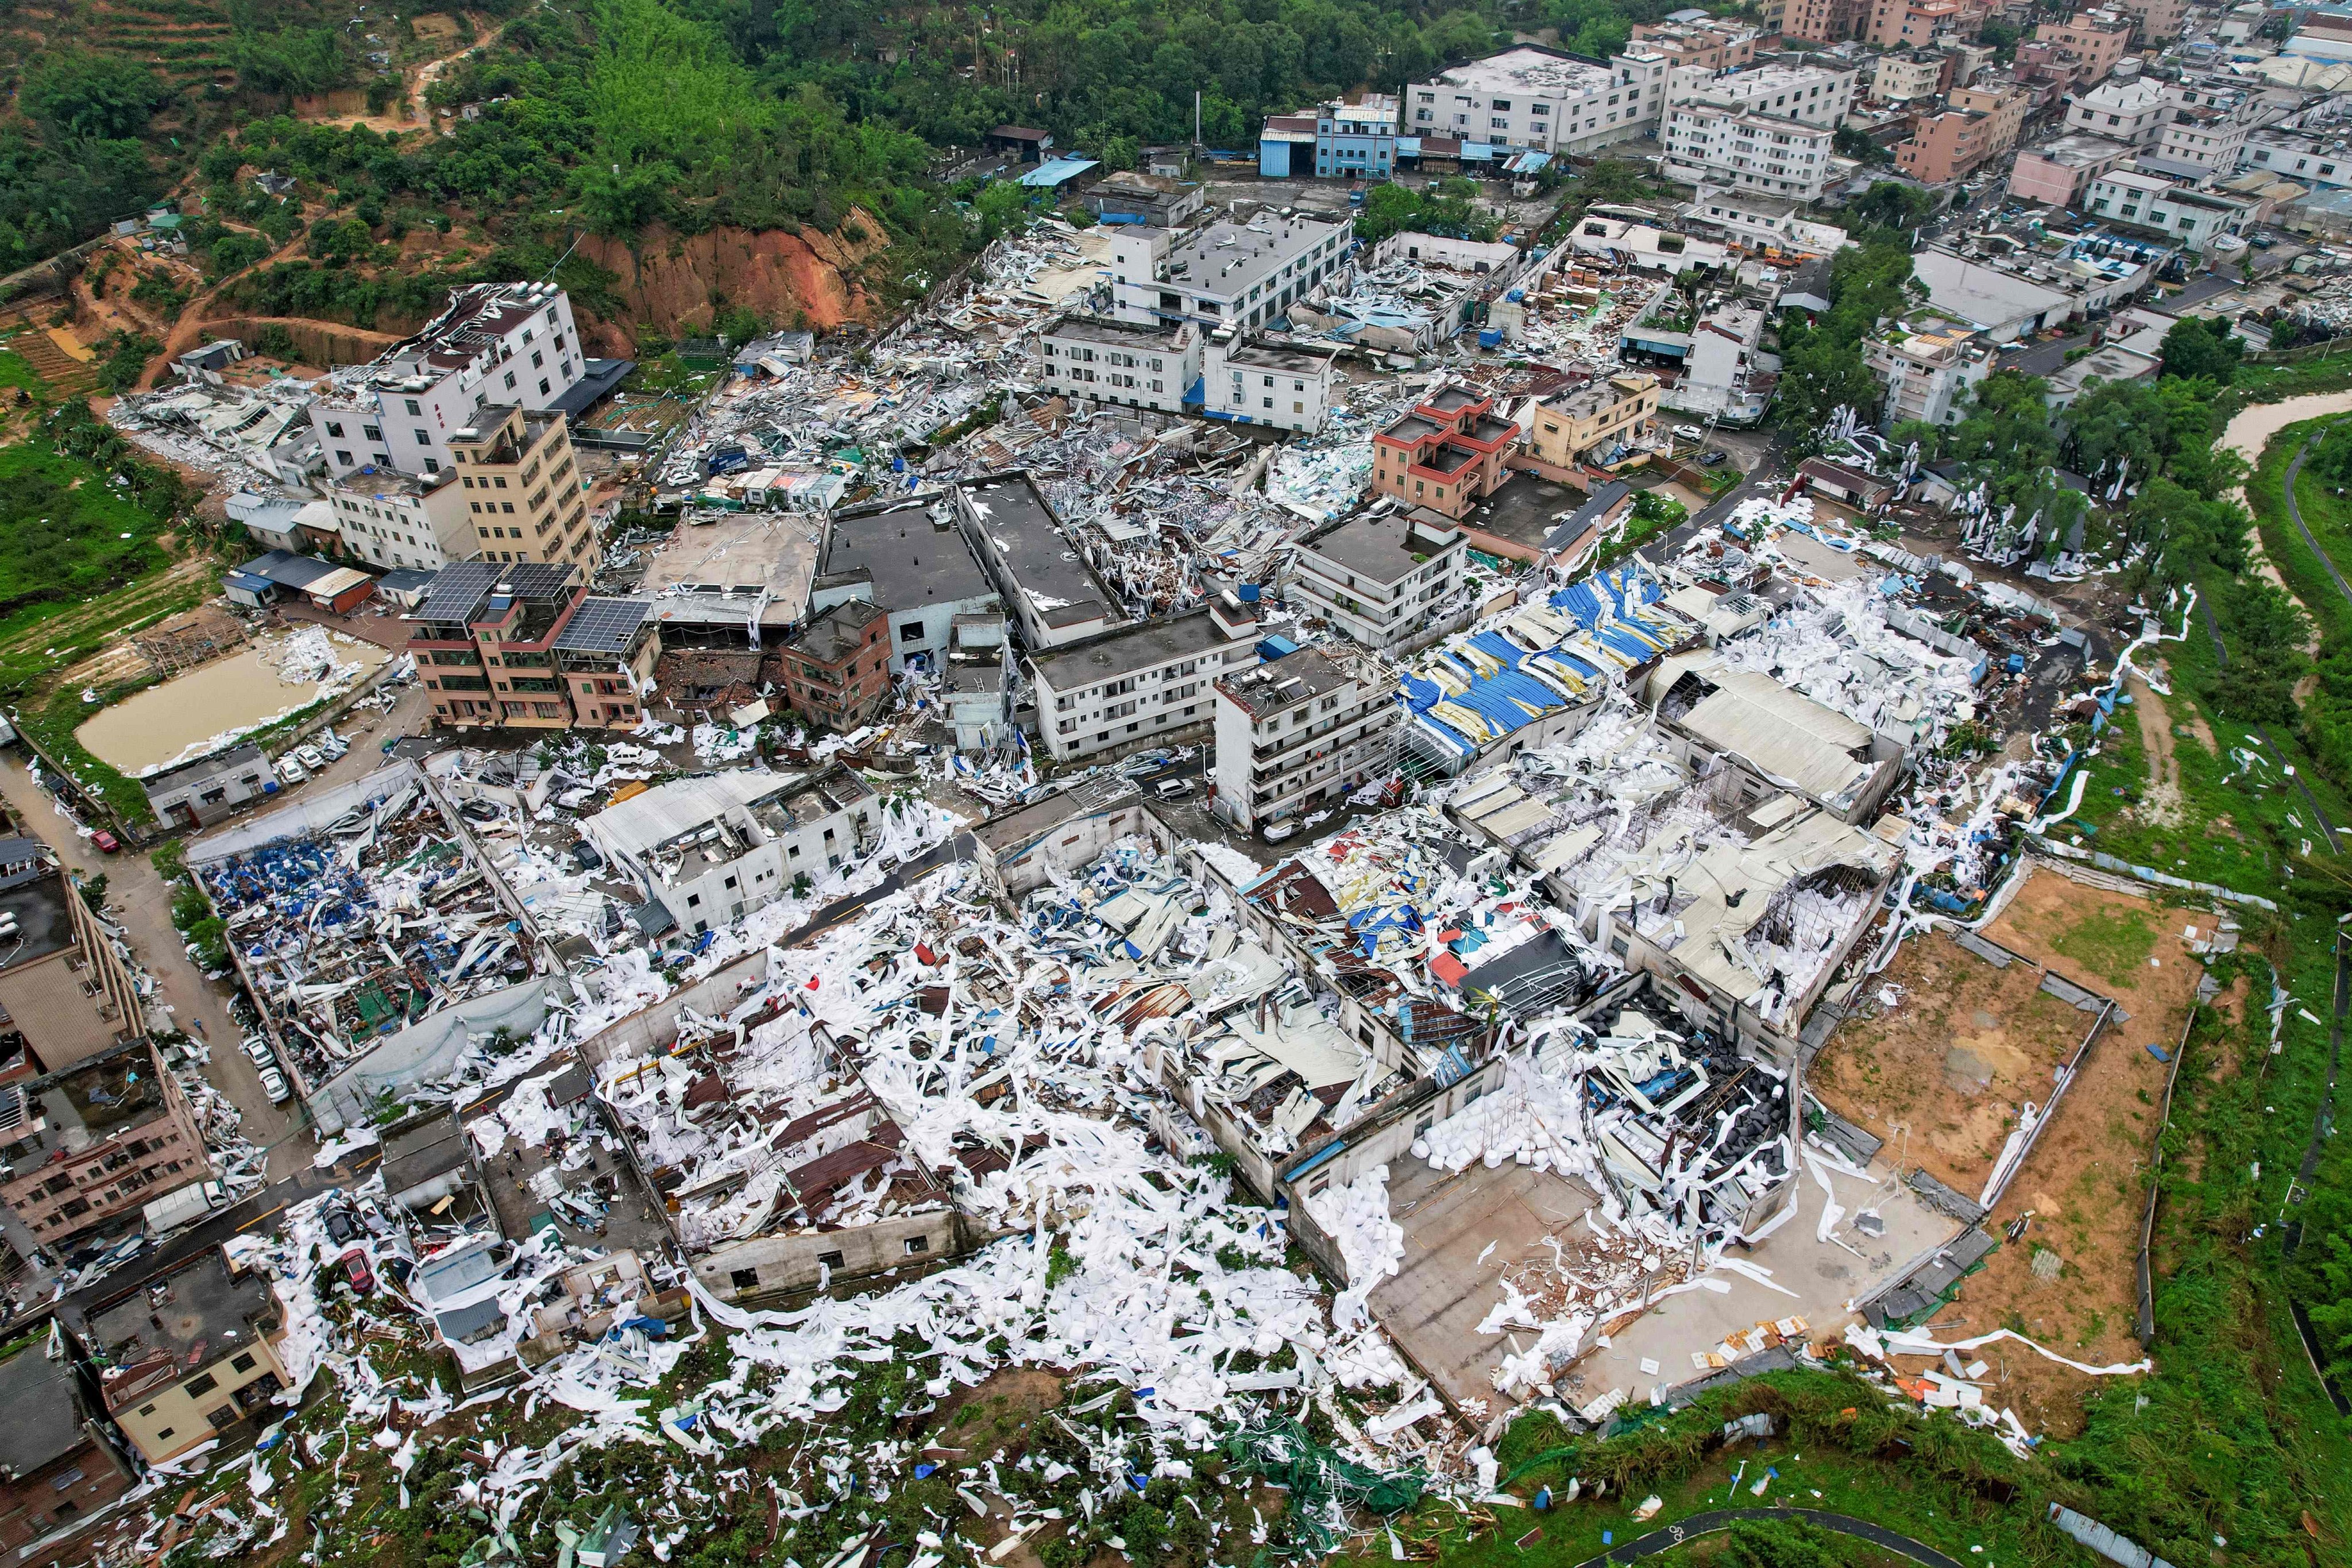 Widespread debris and damaged buildings seen in Baiyun district of Guangzhou in the aftermath of Saturday’s killer tornado. Photo: CNS/AFP